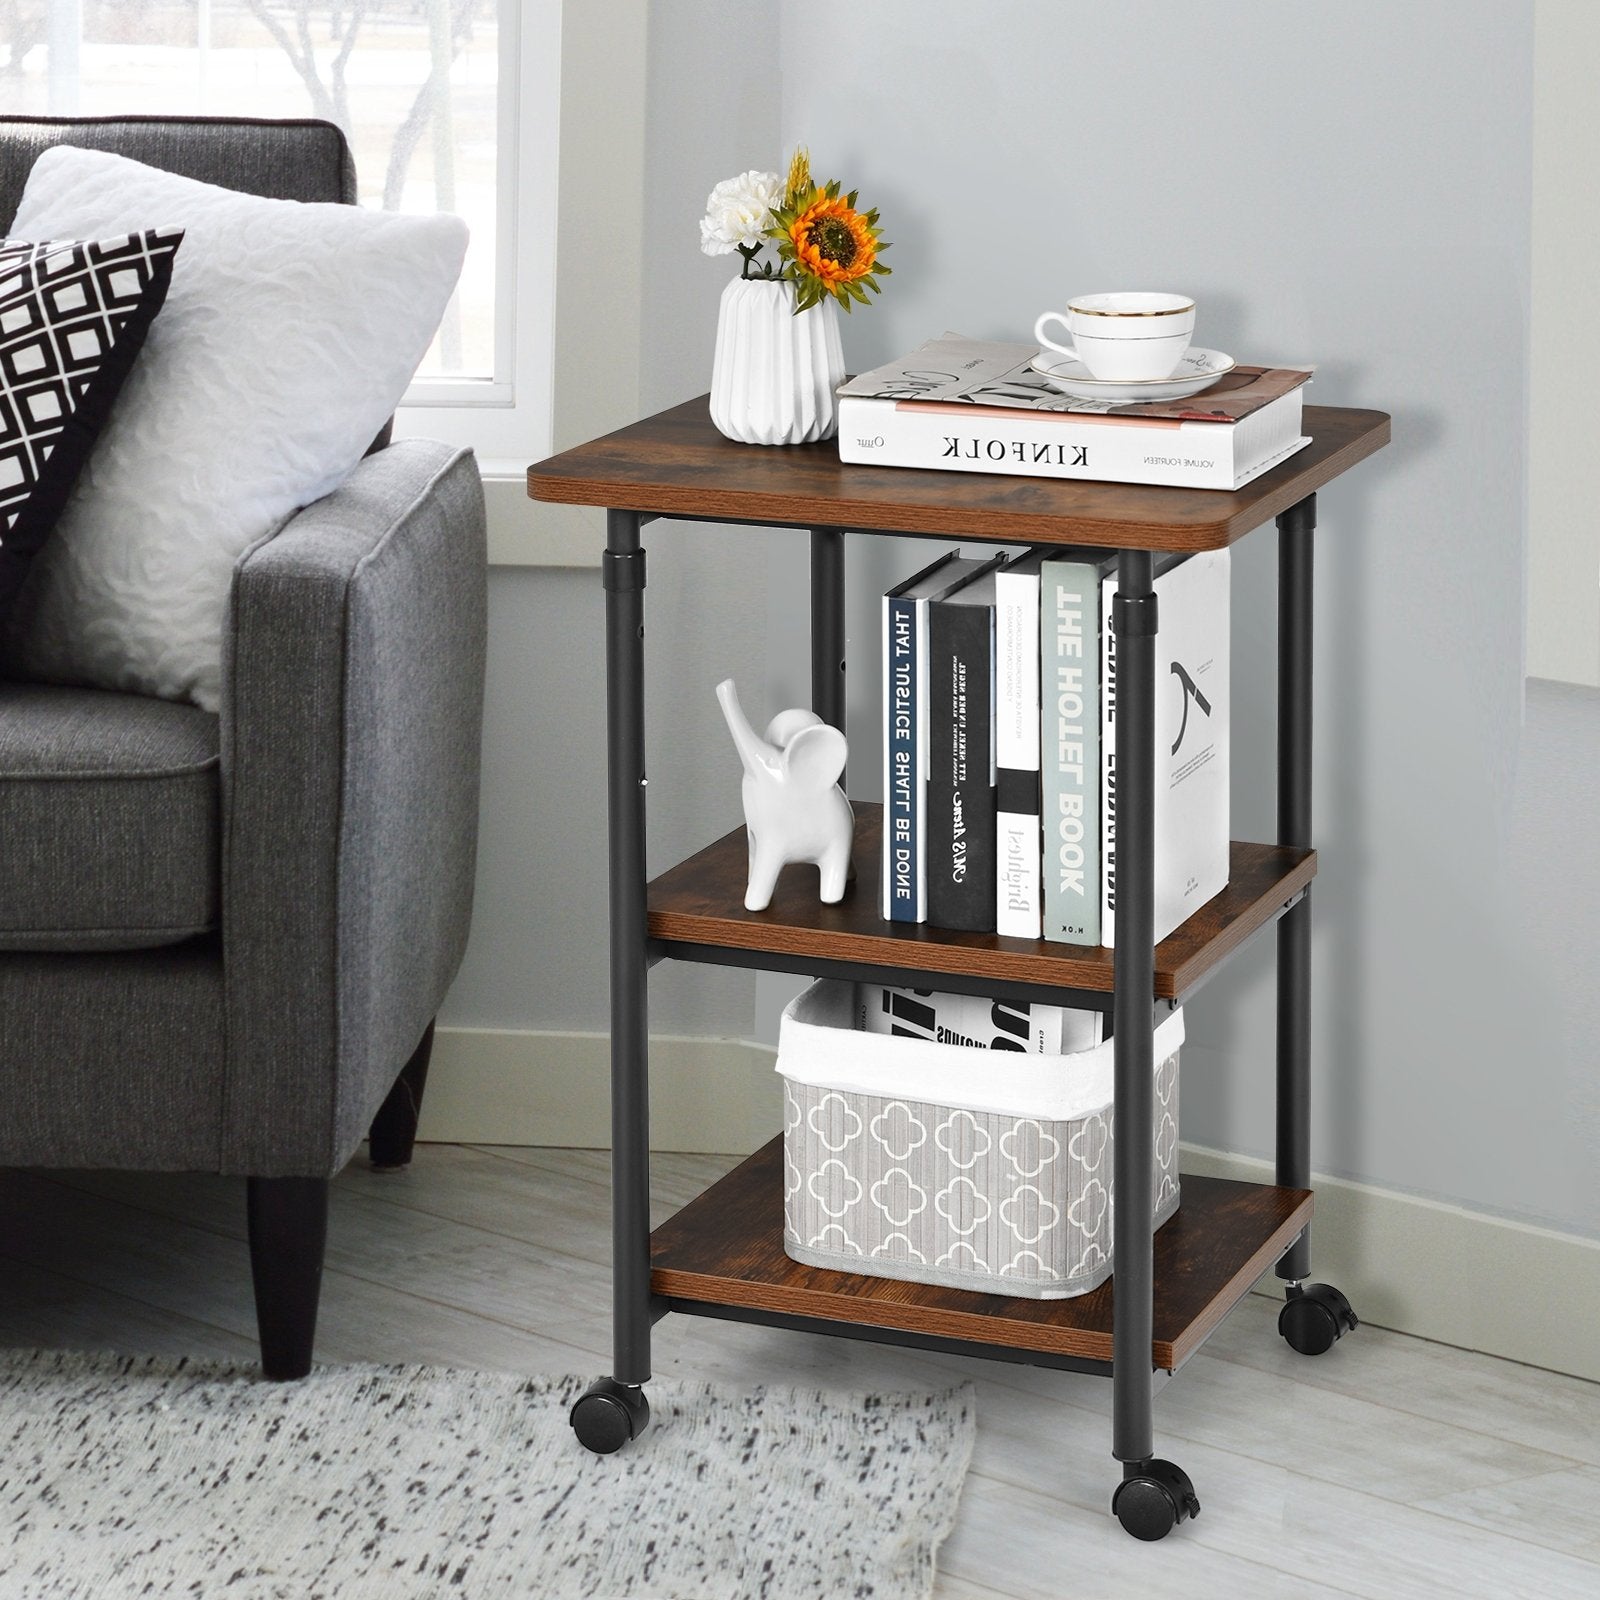 3-tier Adjustable Printer Stand with 360° Swivel Casters, Brown at Gallery Canada